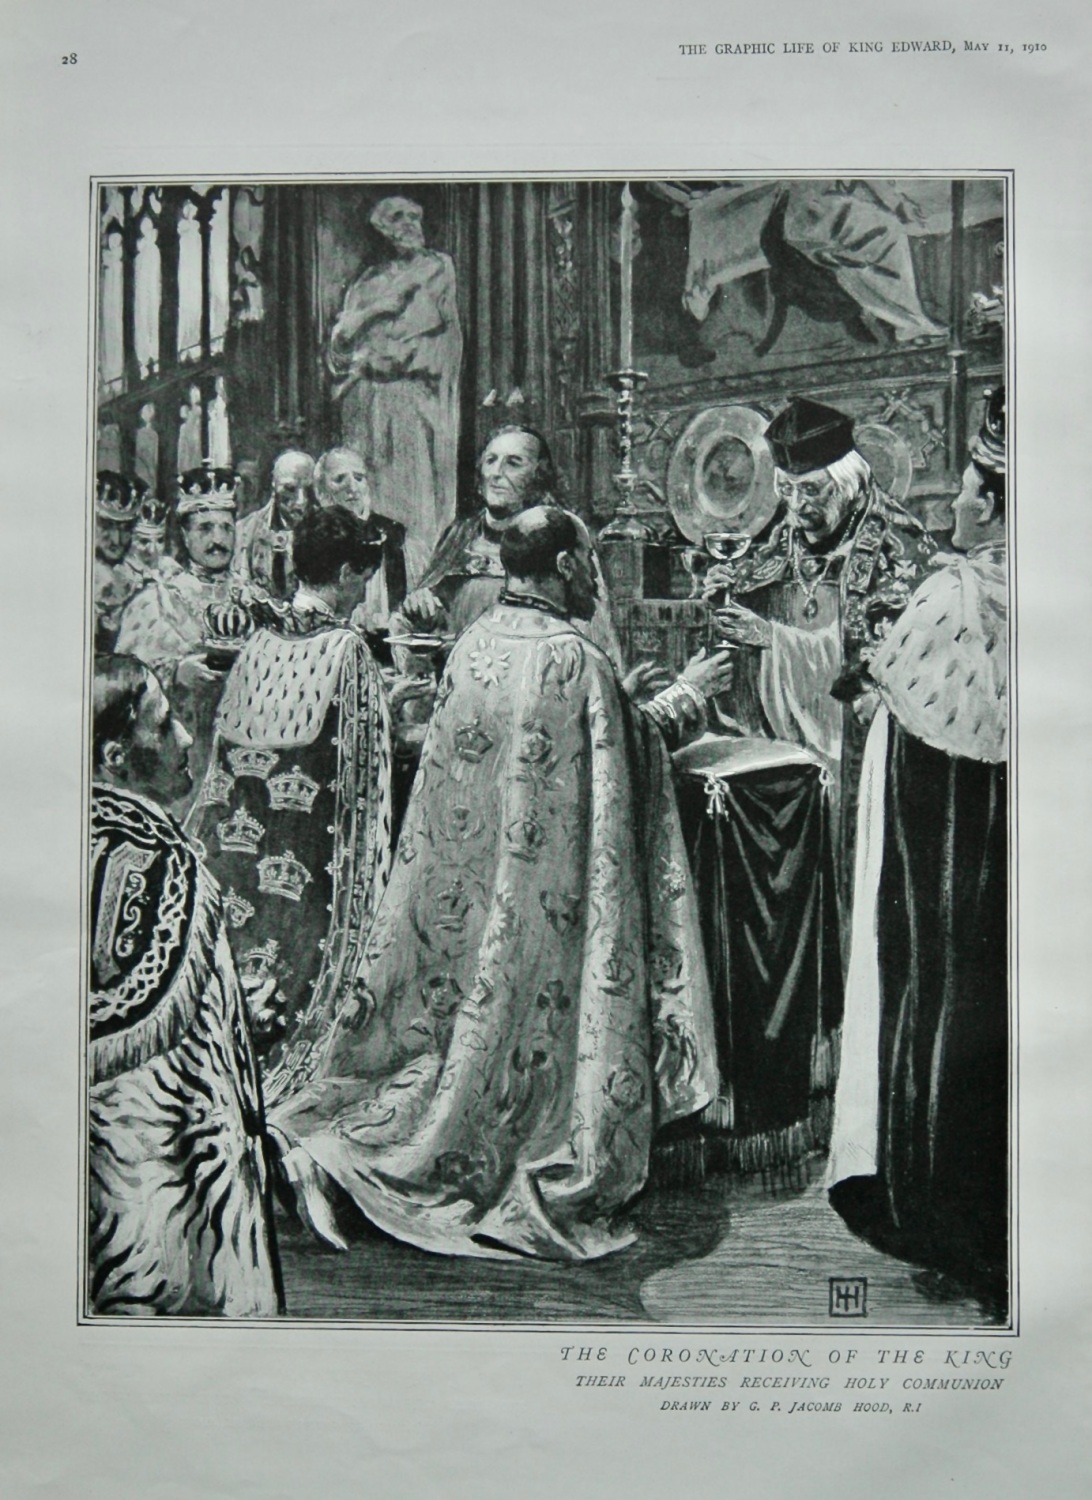 Coronation of the King : Their Majesties Receiving Holy Communion.  (King E